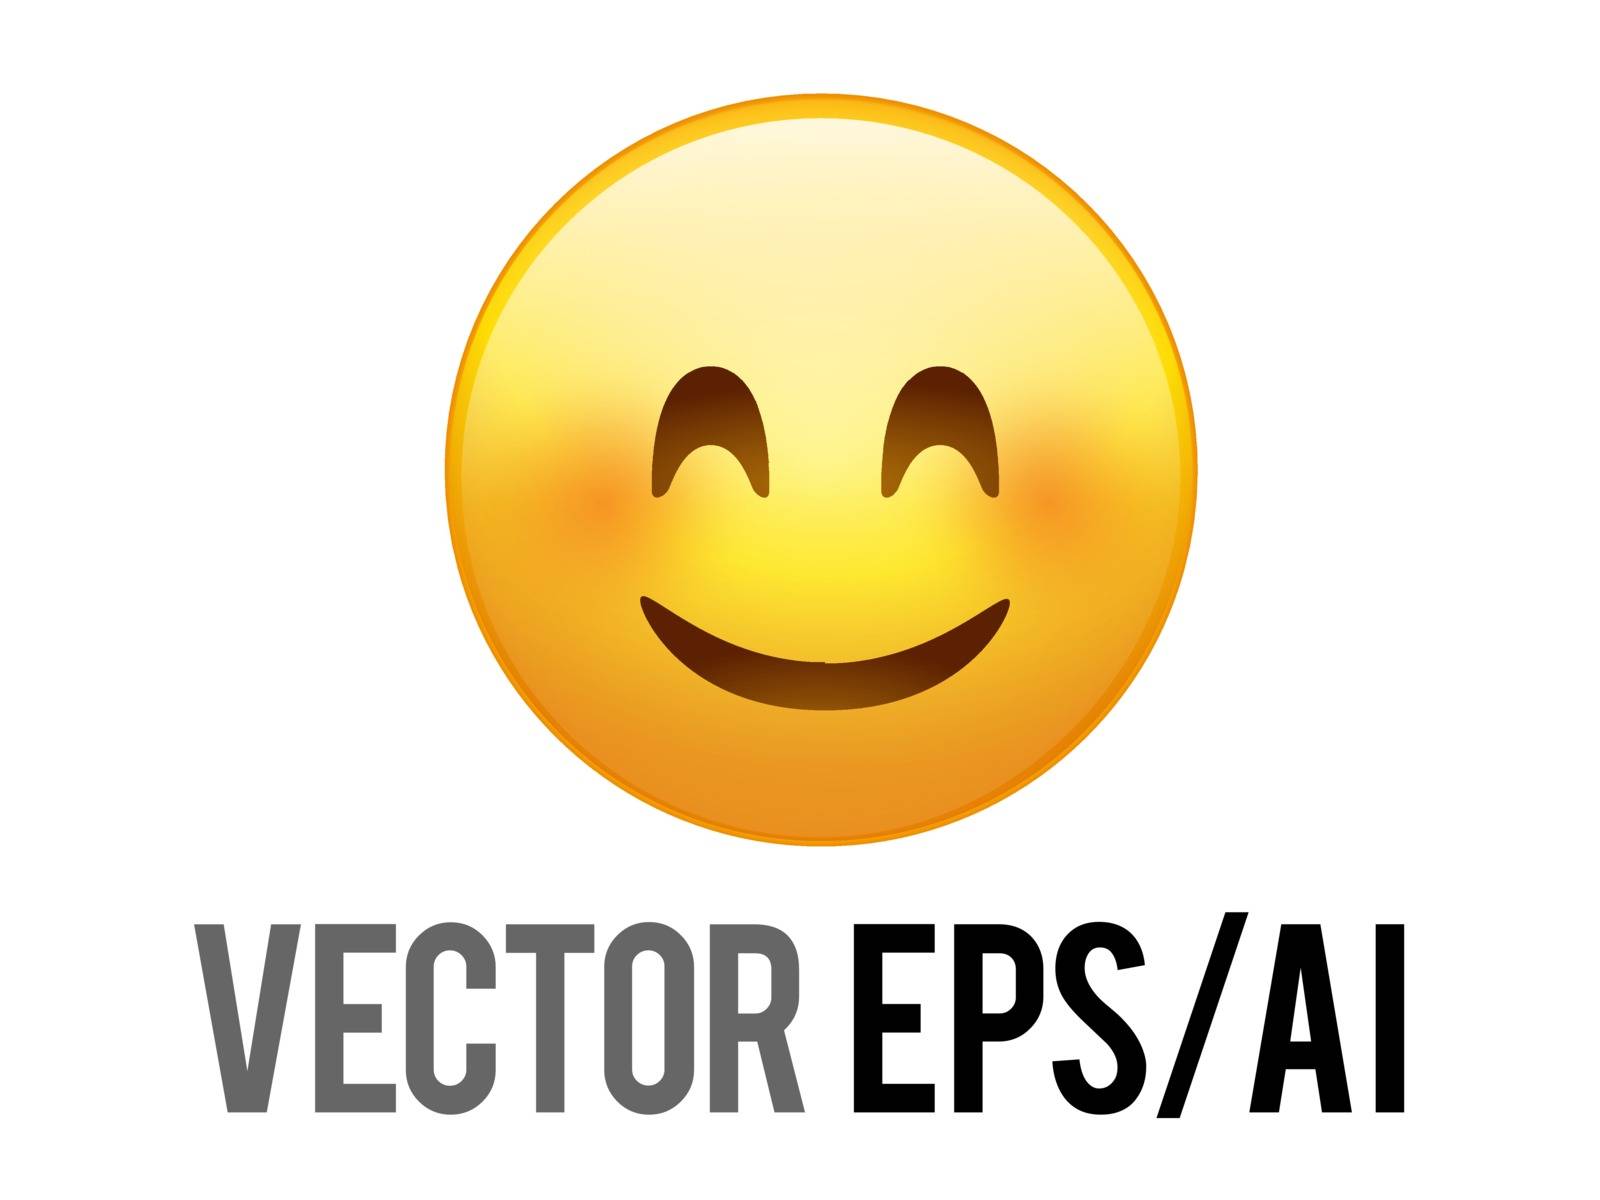 The isolated vector yellow happy smiley face icon with red cheek